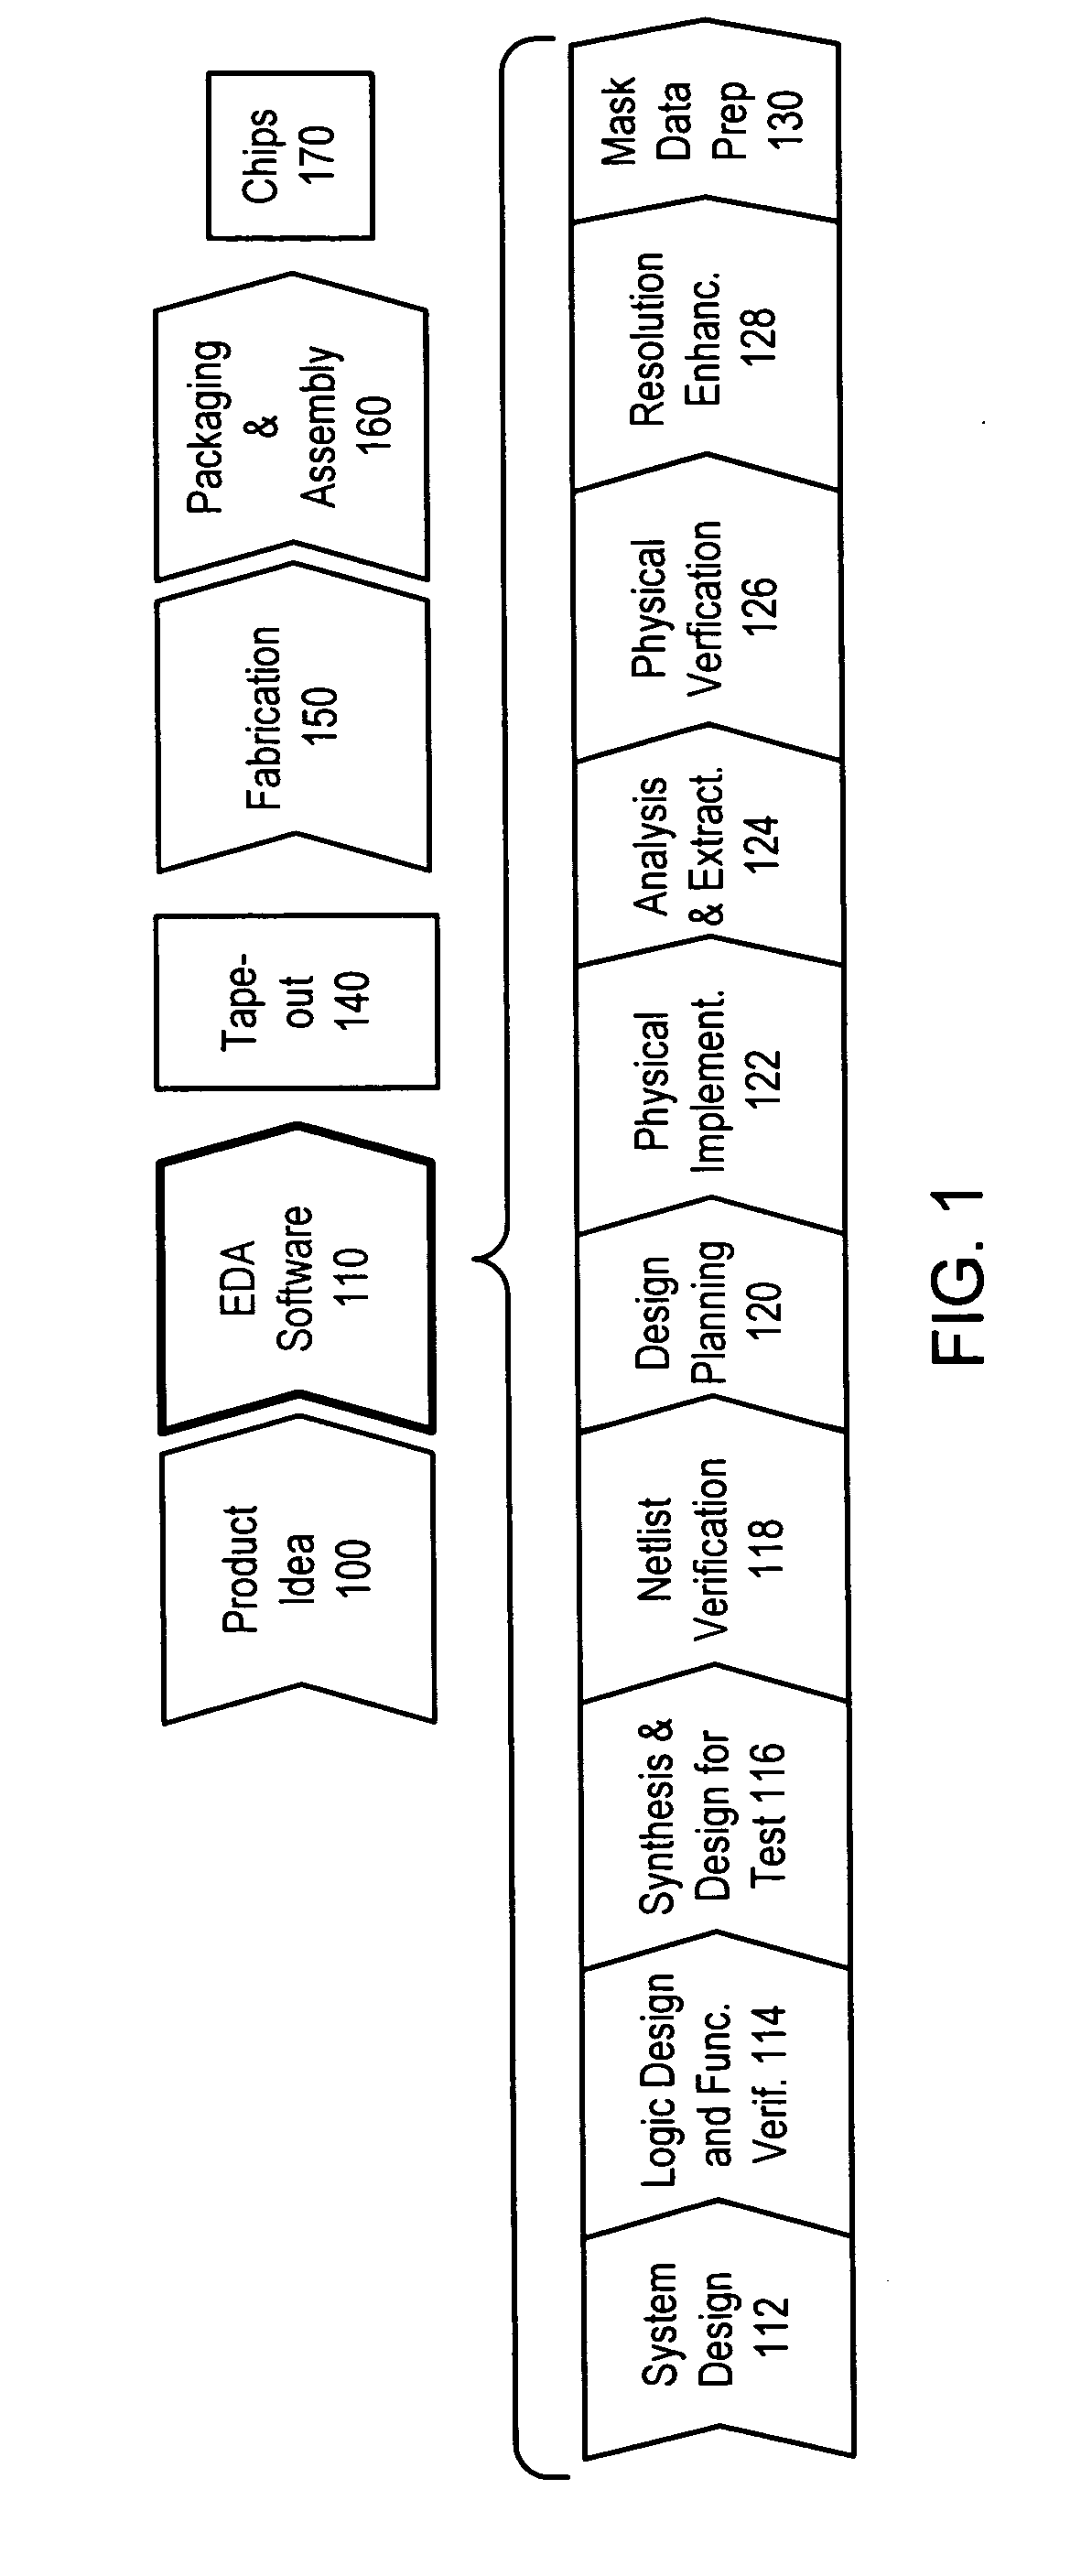 Distributed hierarchical partitioning framework for verifying a simulated wafer image